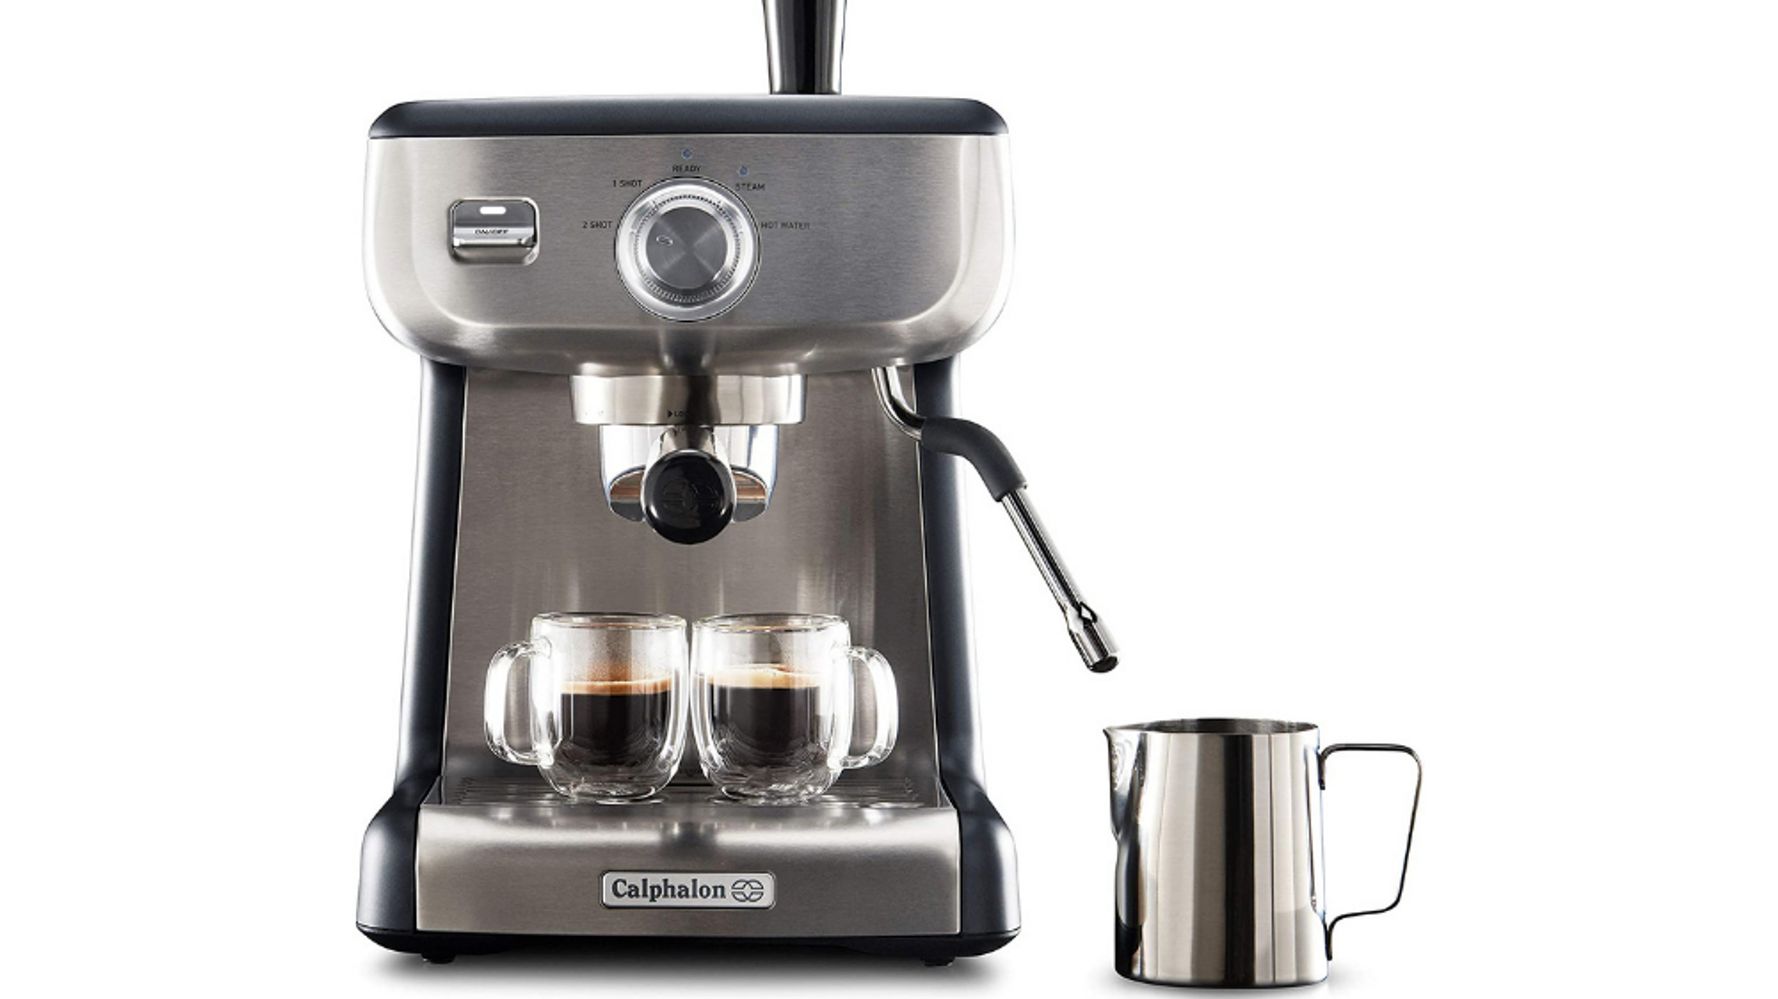 The Best Prime Day Deals For Coffee Makers Are Here